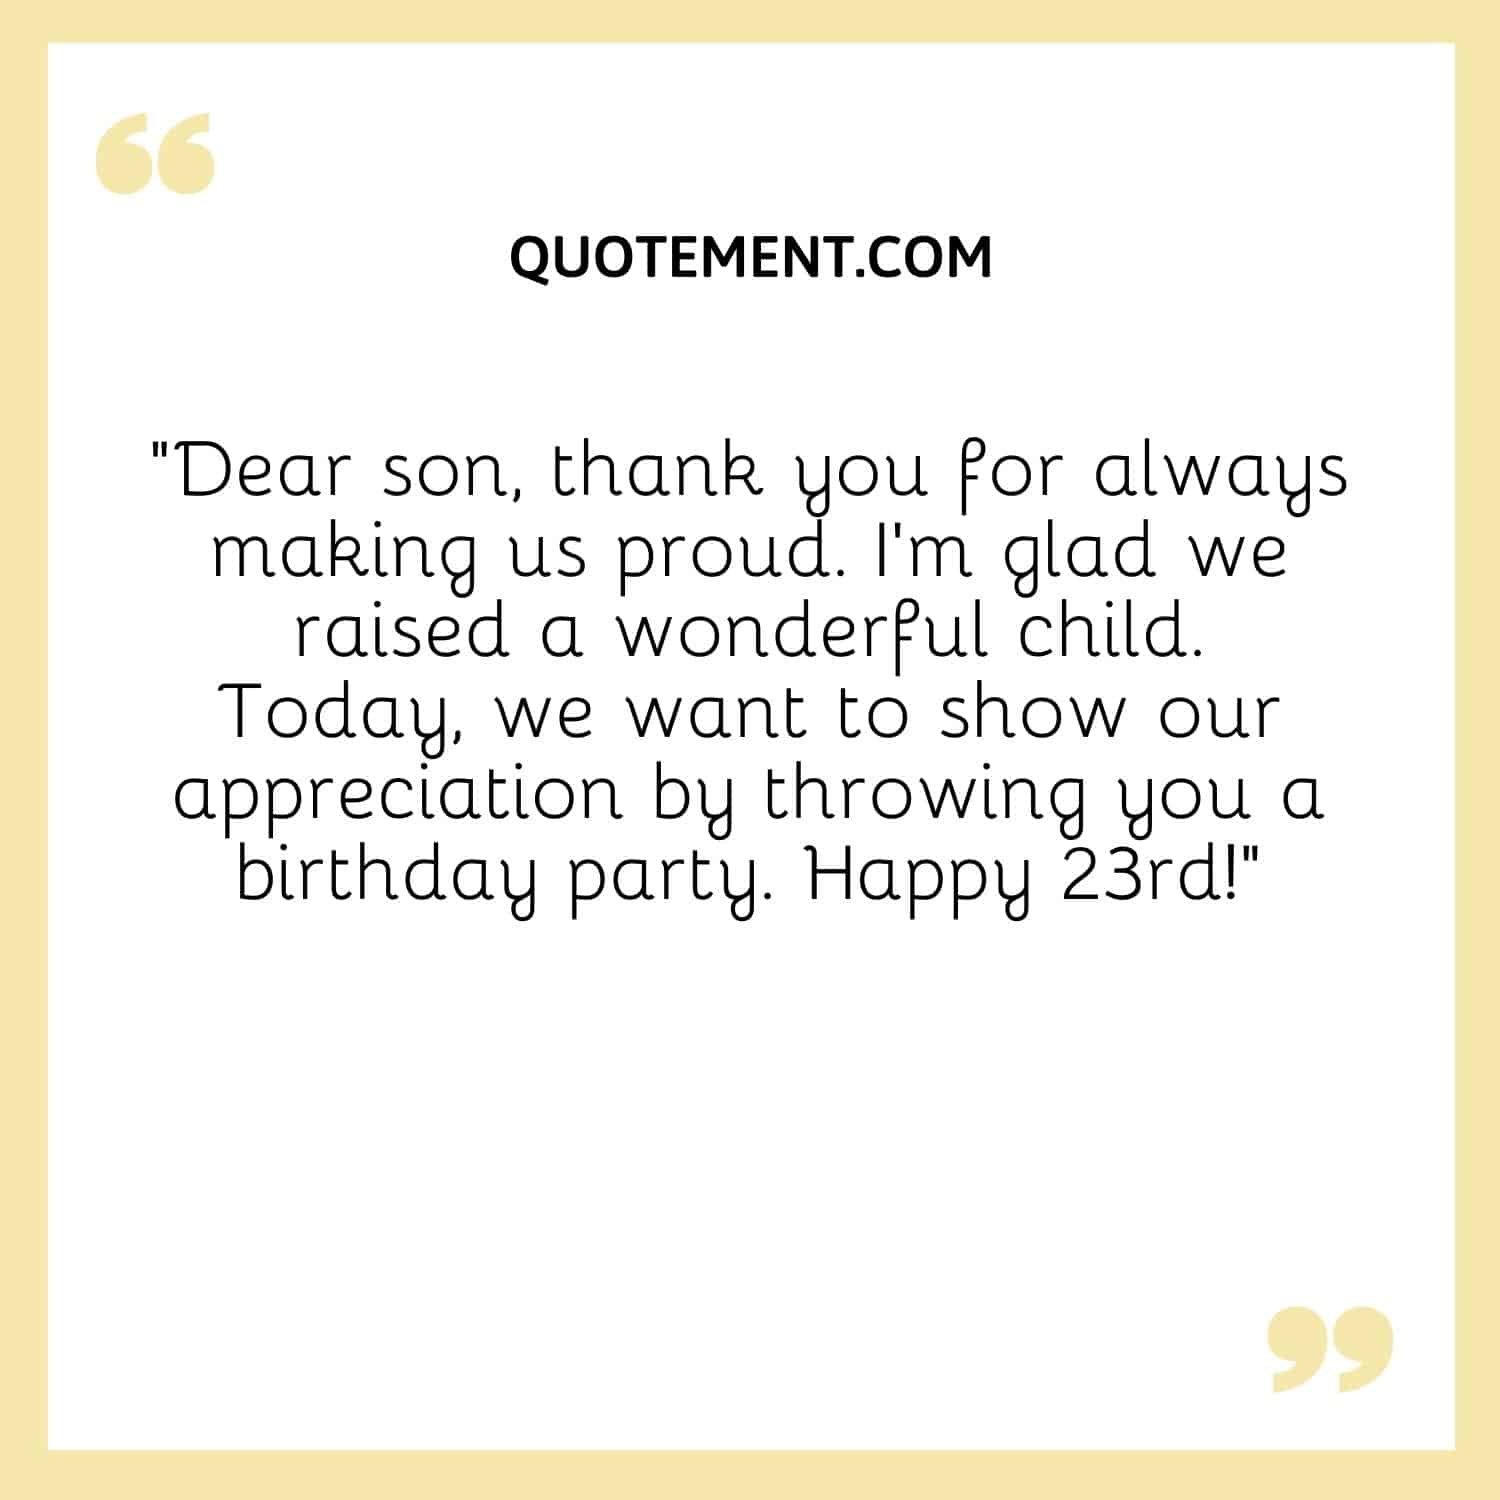 Dear son, thank you for always making us proud